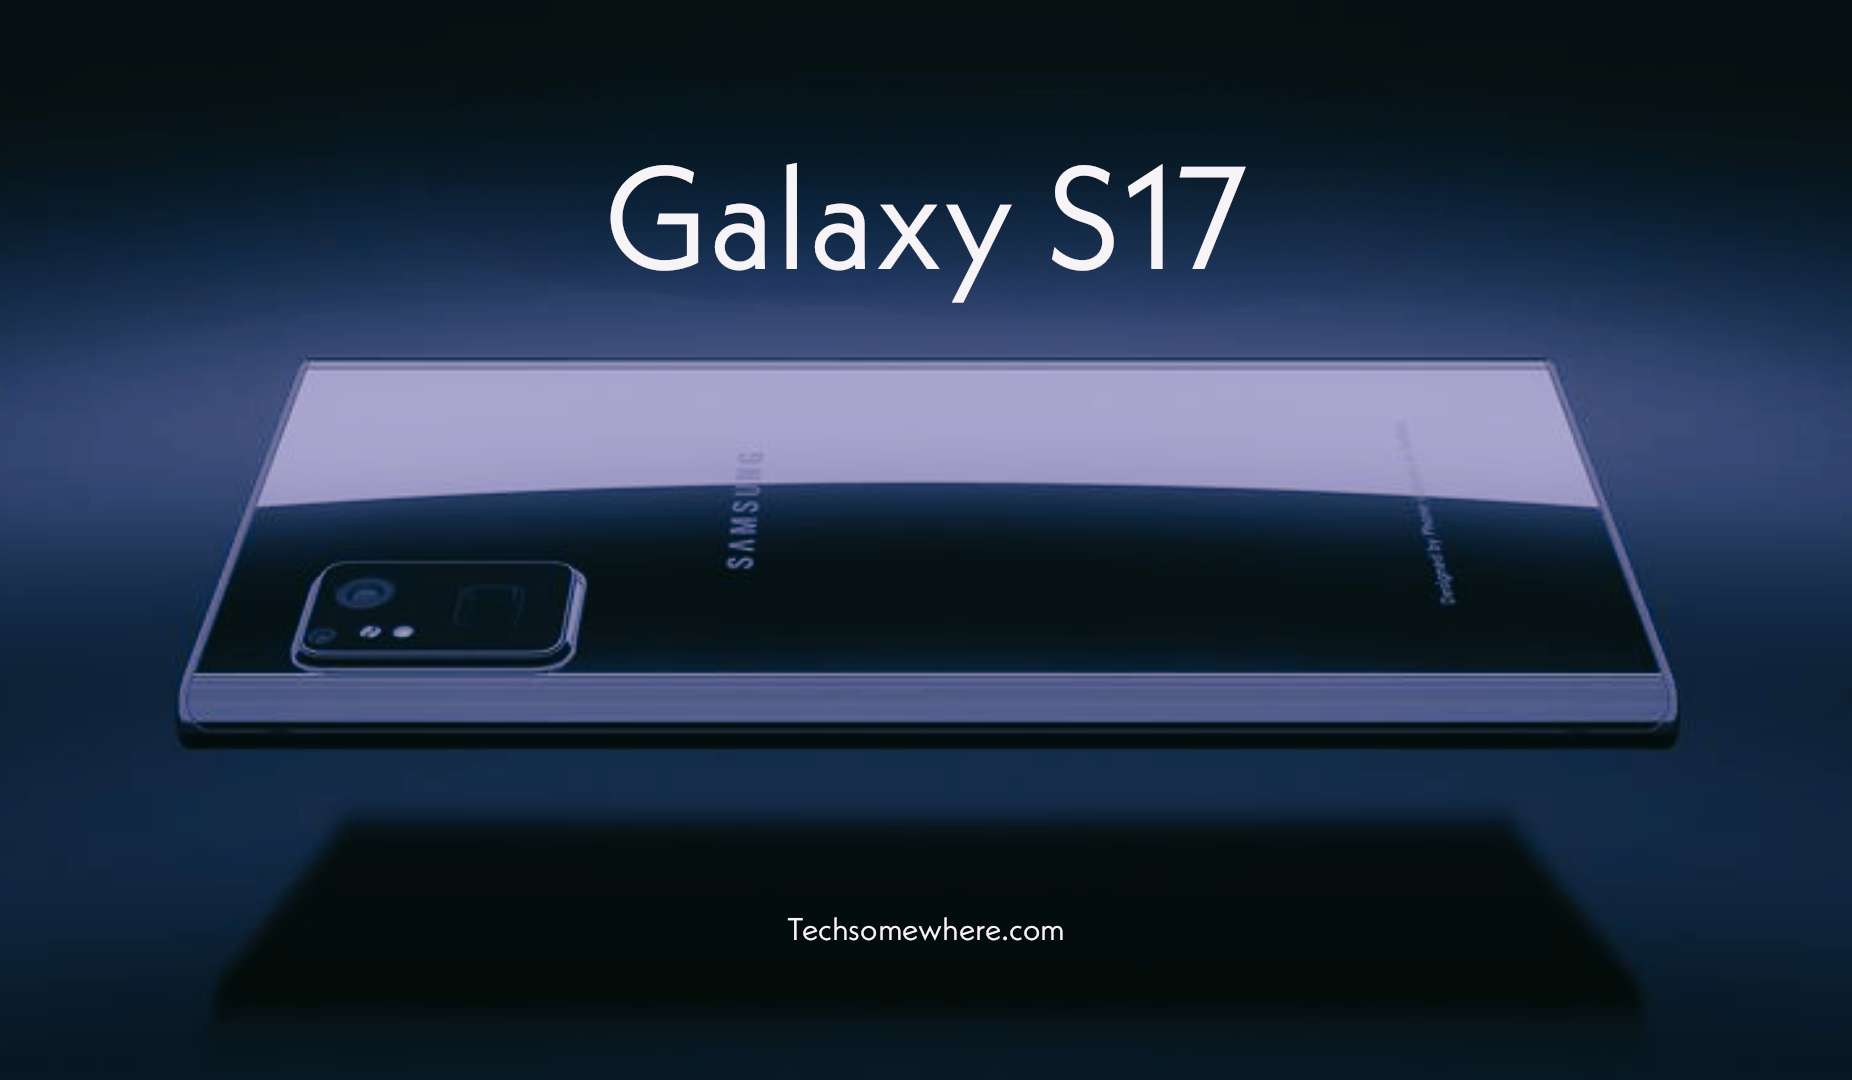 Samsung Galaxy S17 Price, Full Specifications, Rumours & Release Date - Techsomewhere